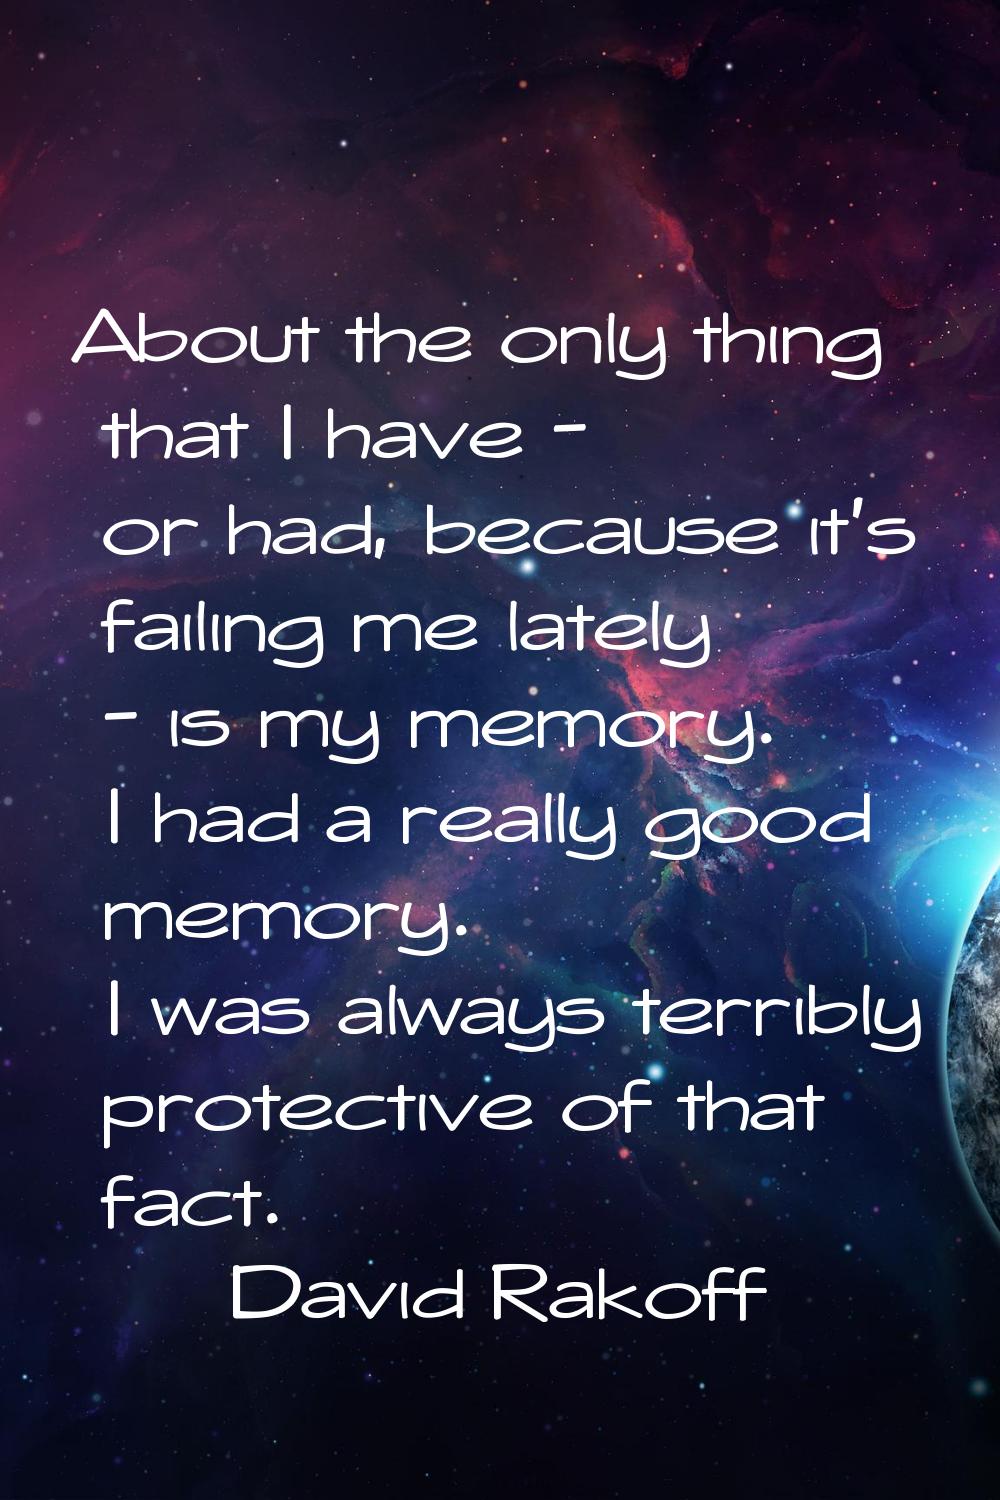 About the only thing that I have - or had, because it's failing me lately - is my memory. I had a r